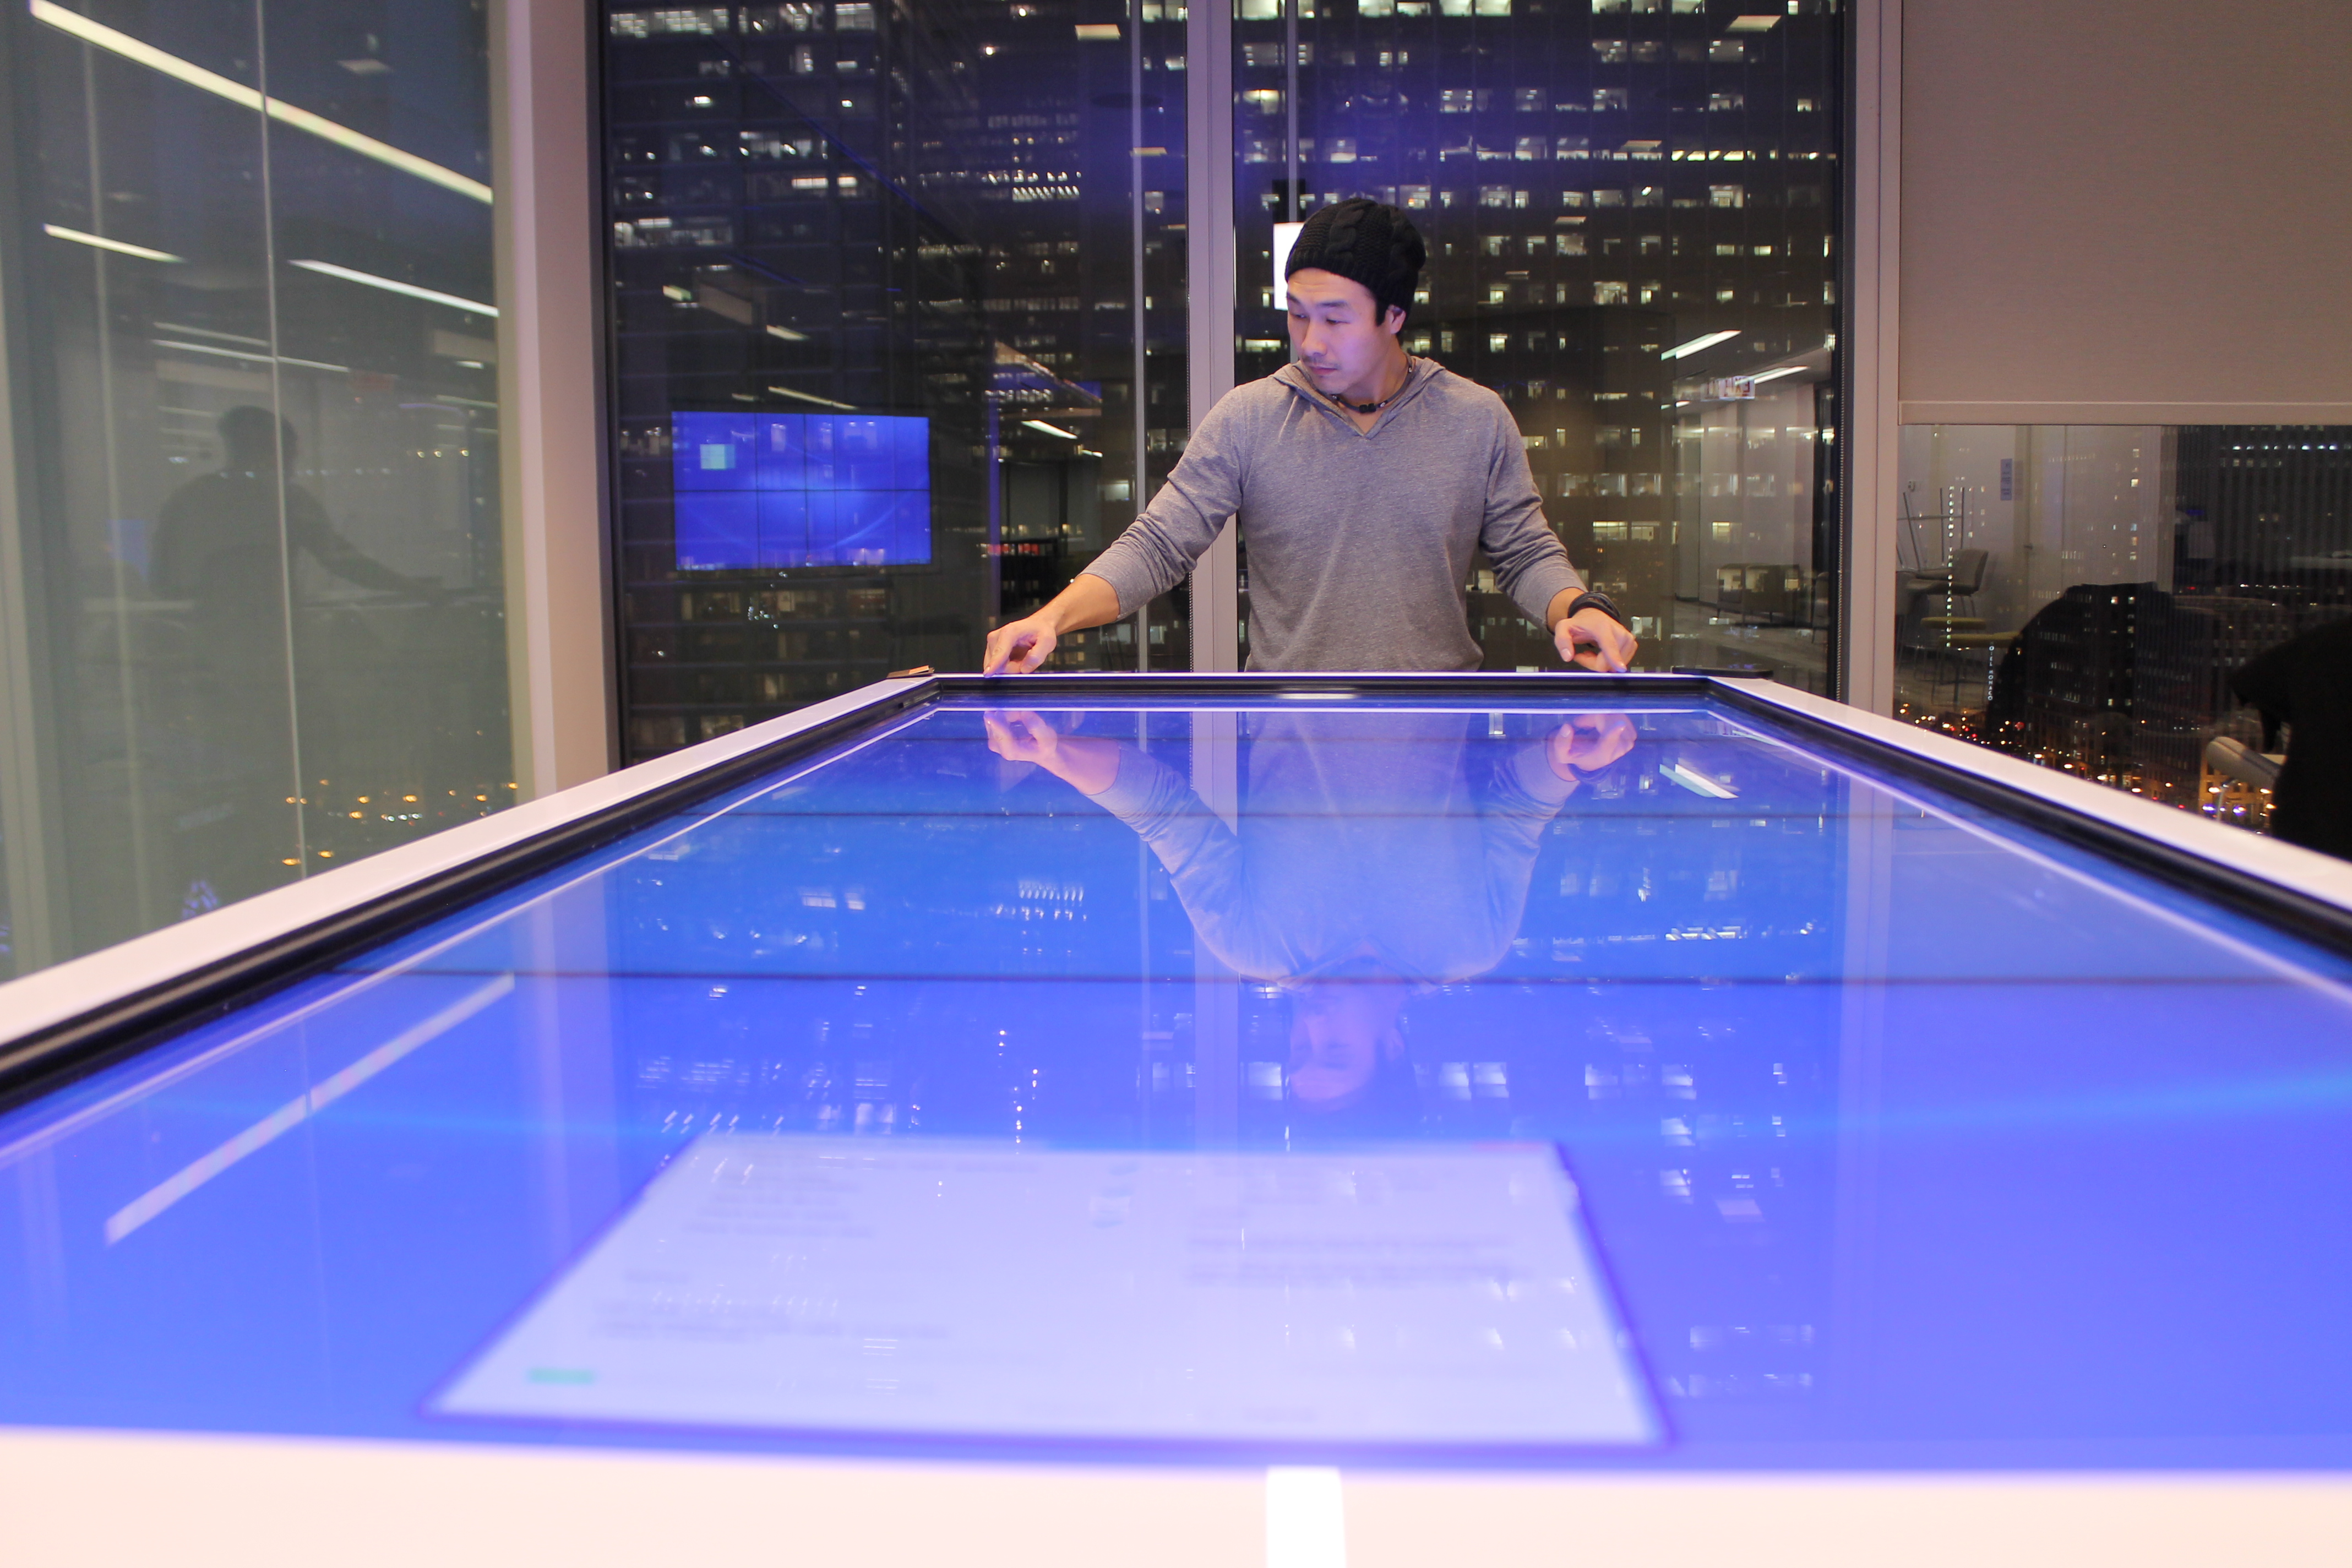 Interactive Touch Table Technology Learning Corporate Center Medical Company by Horizon Display